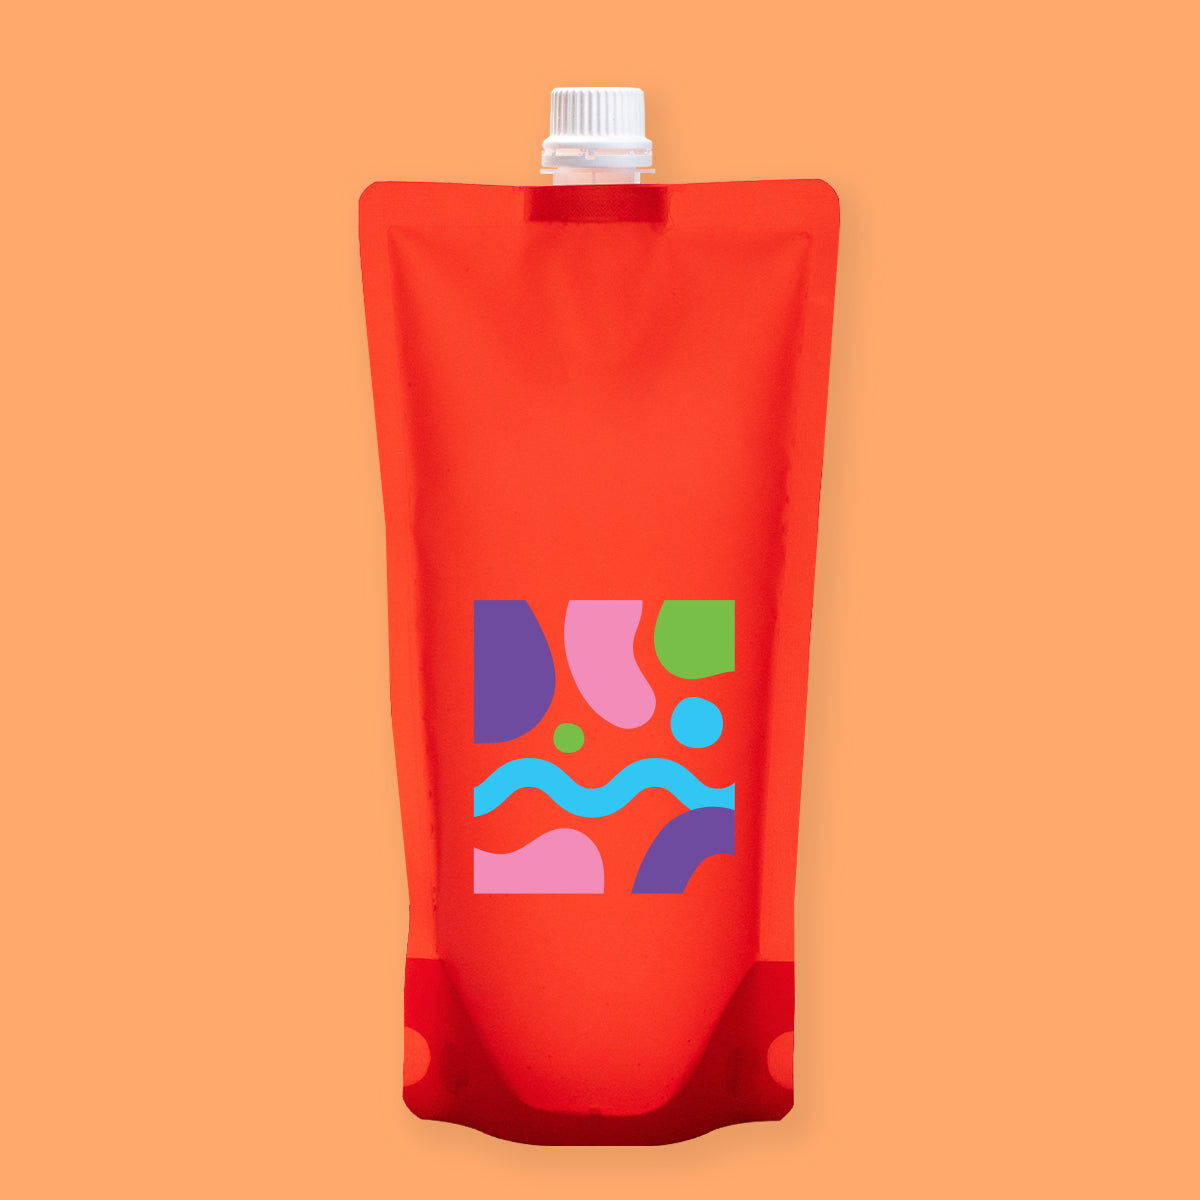 Ripple Coral Paper SuCo 2.0 - 600 ml